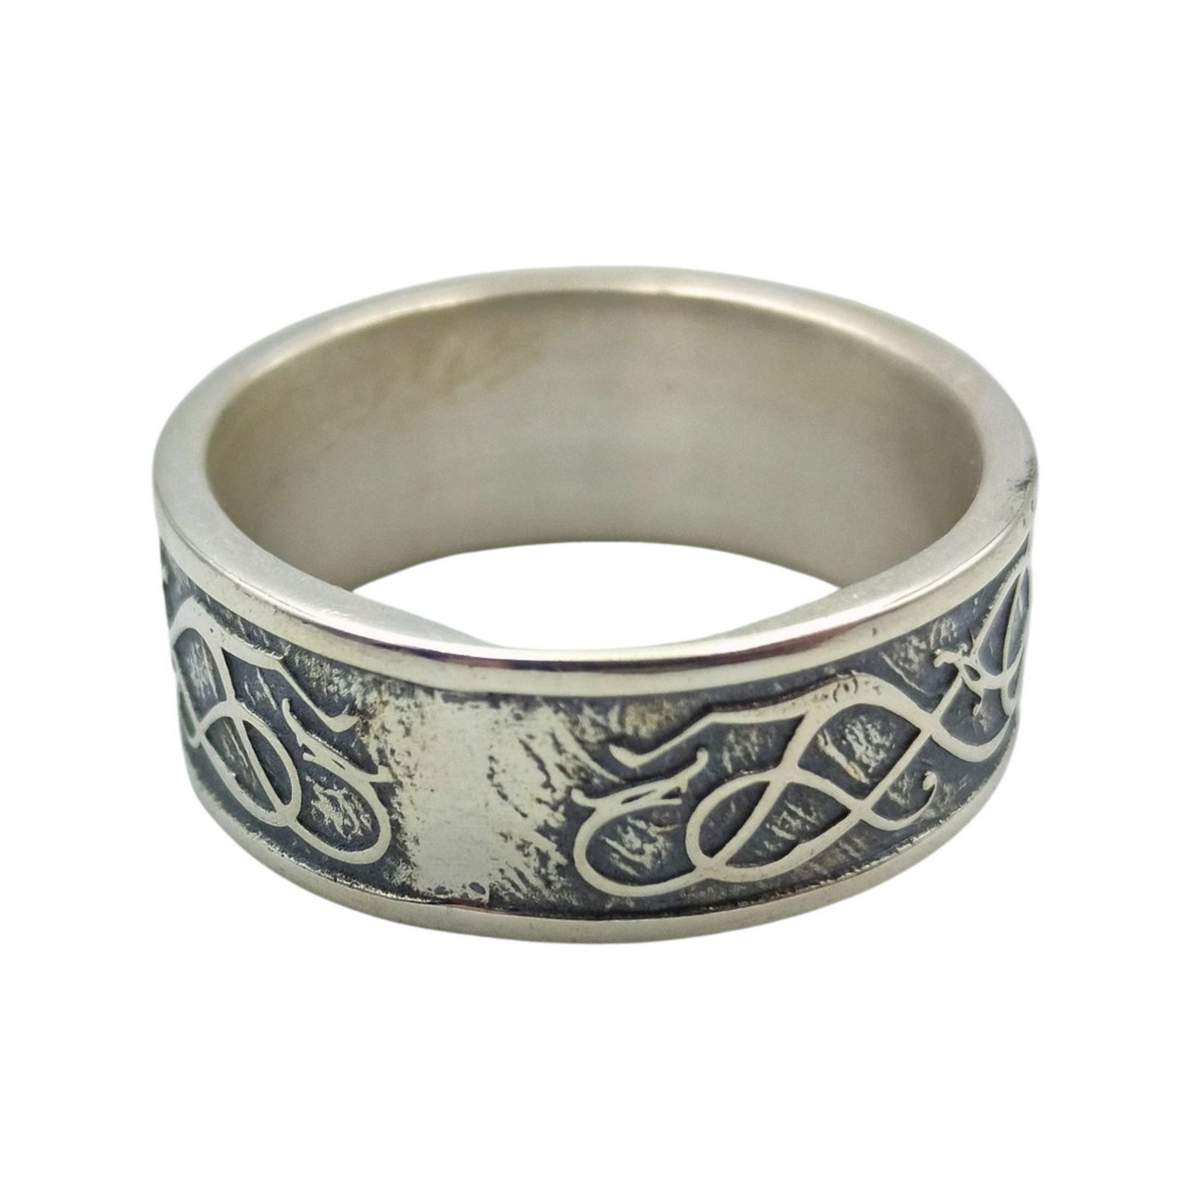 Norse Urnes ornament silver rings